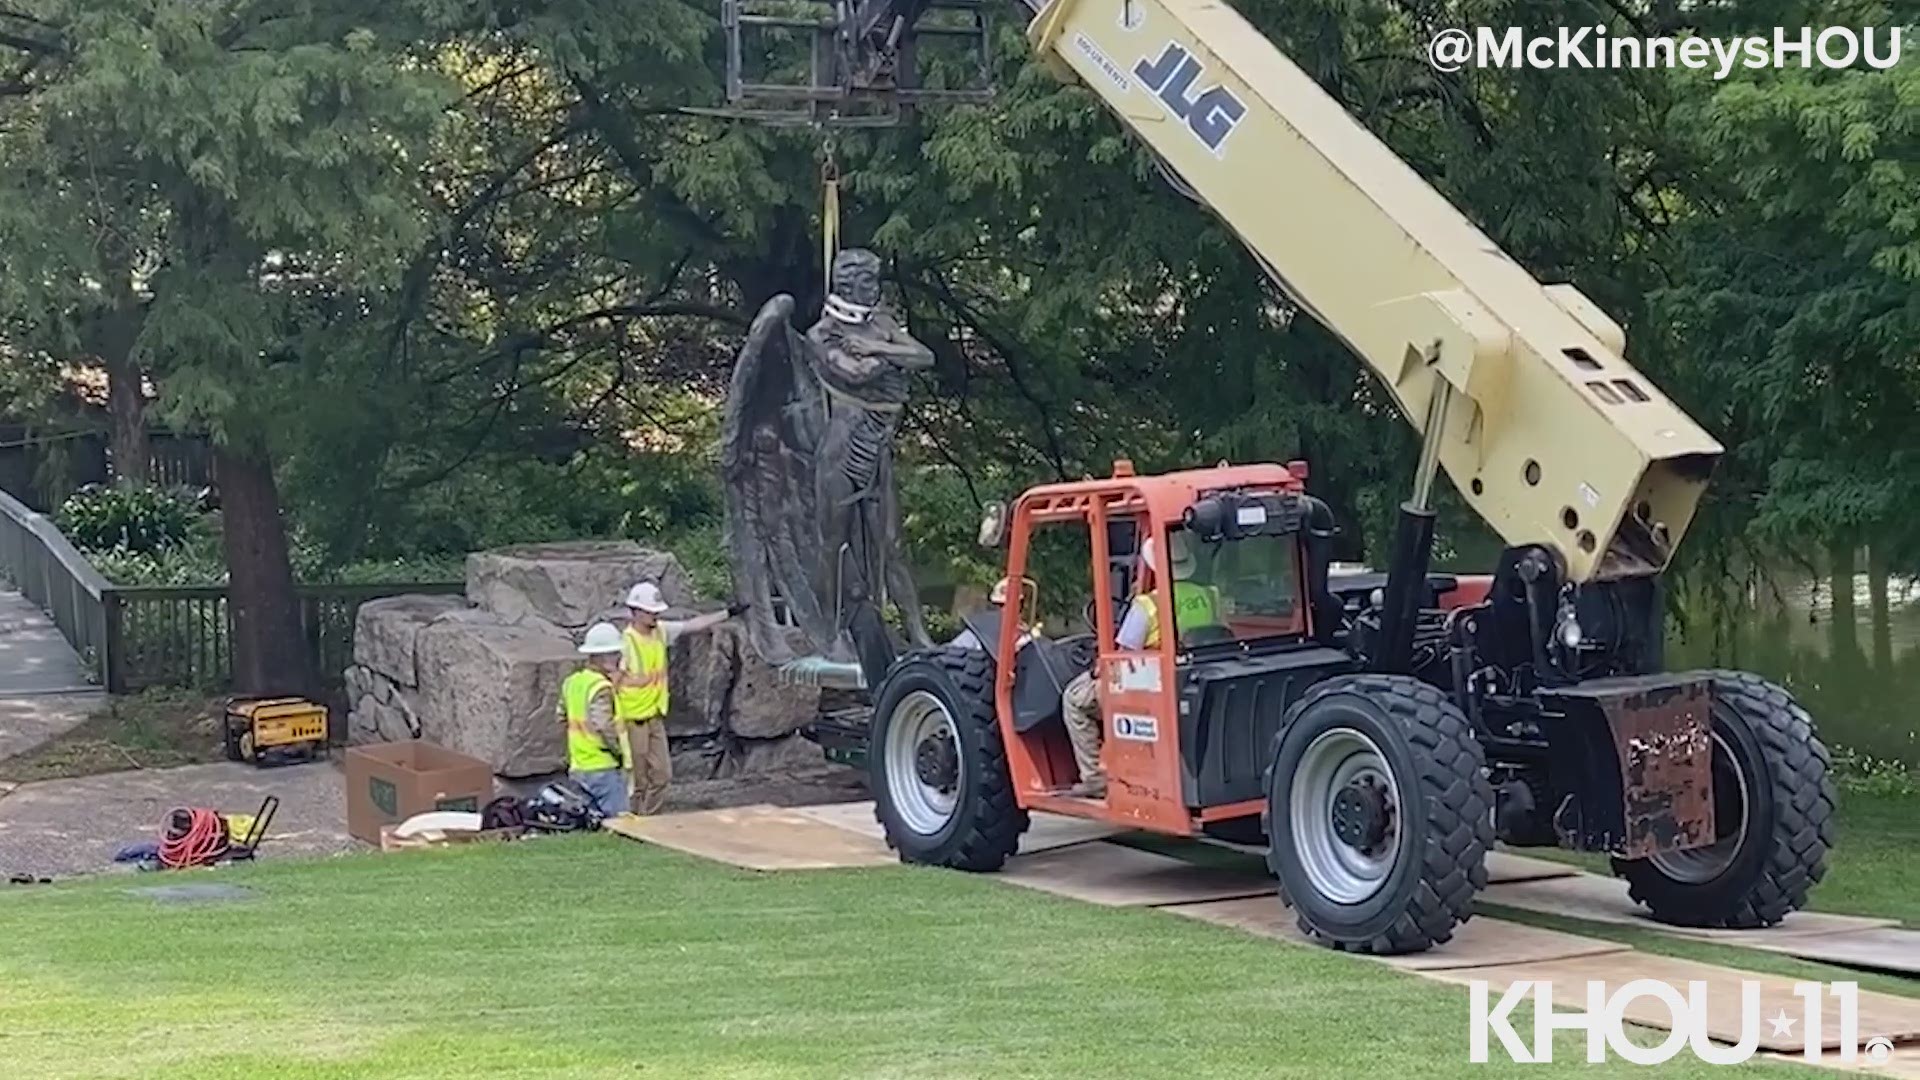 The statue was removed Tuesday and will eventually be placed at the Houston Museum of African-American Culture.